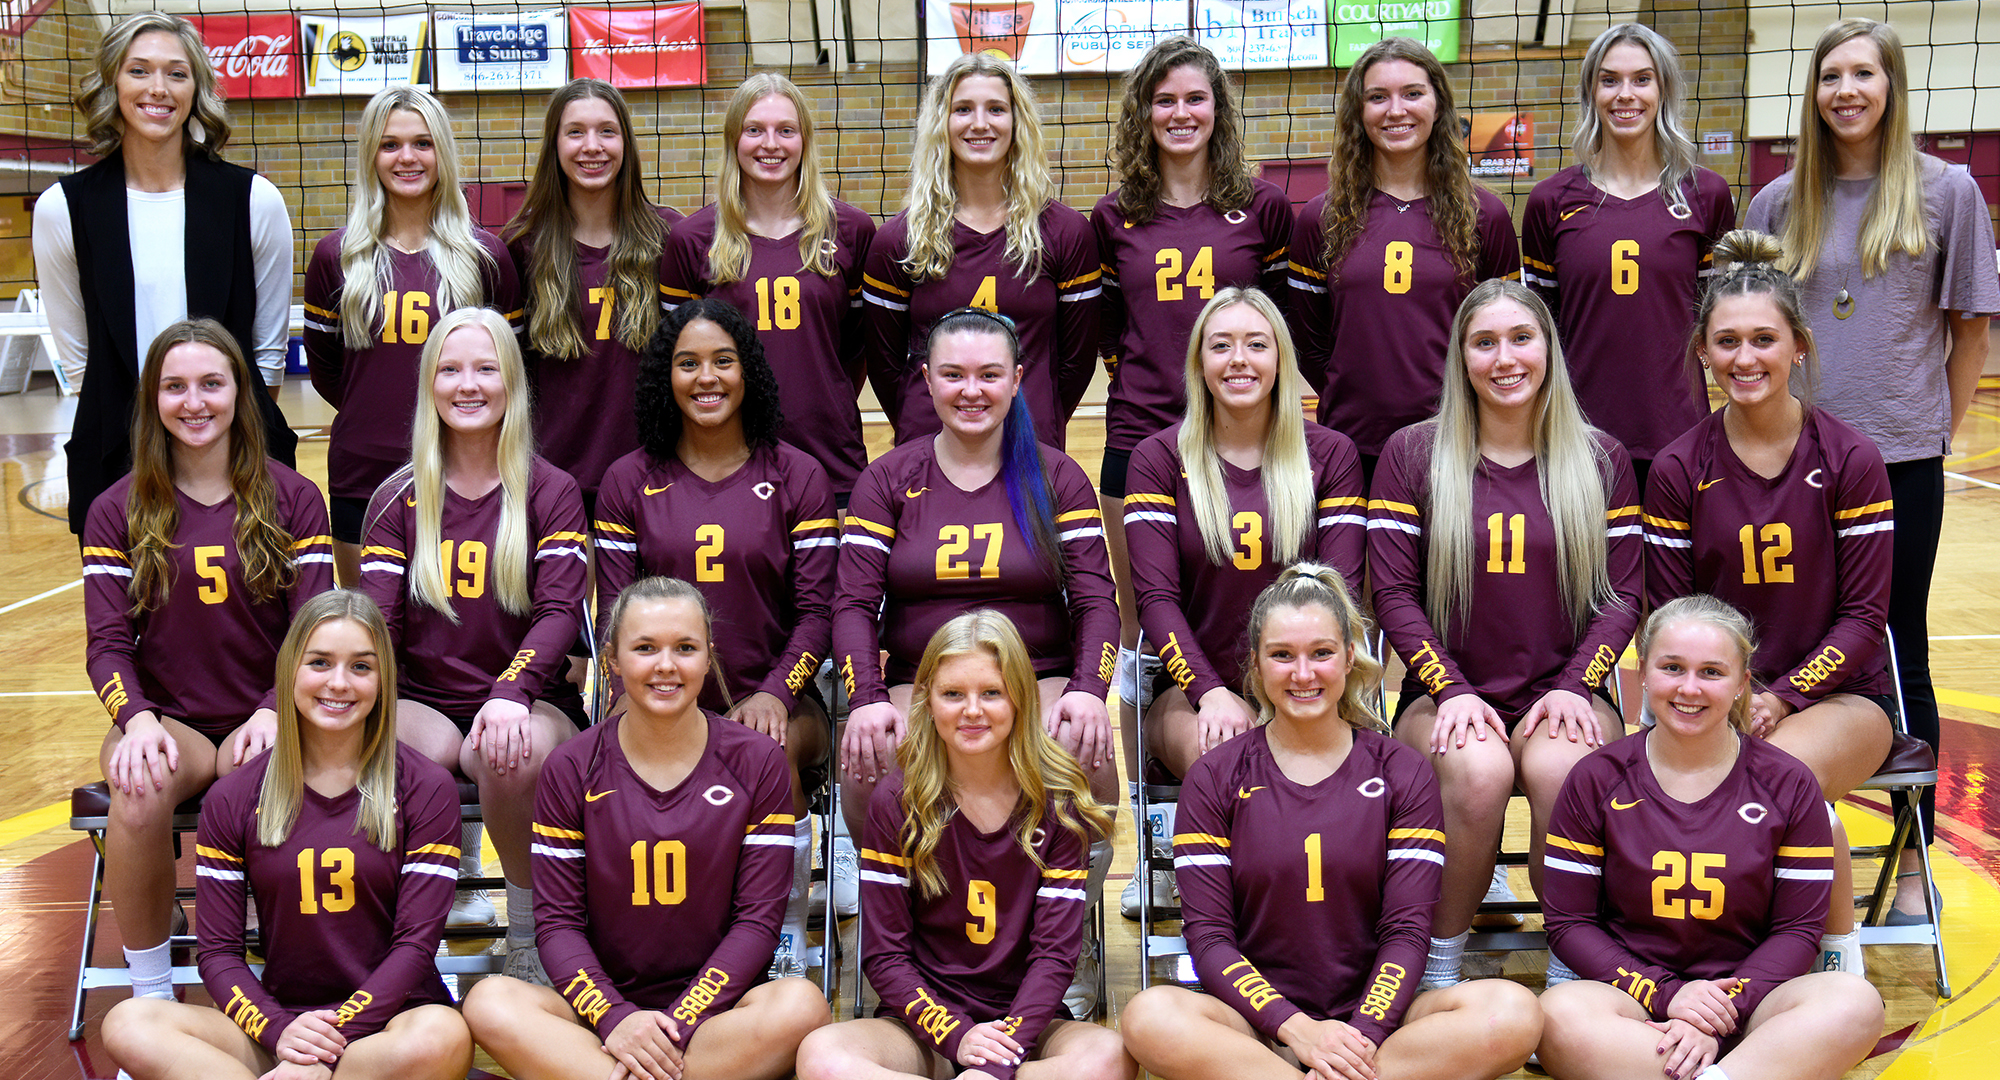 The American Volleyball Coaches Association announced that Concordia has earned the USMC/AVCA Team Academic Award.